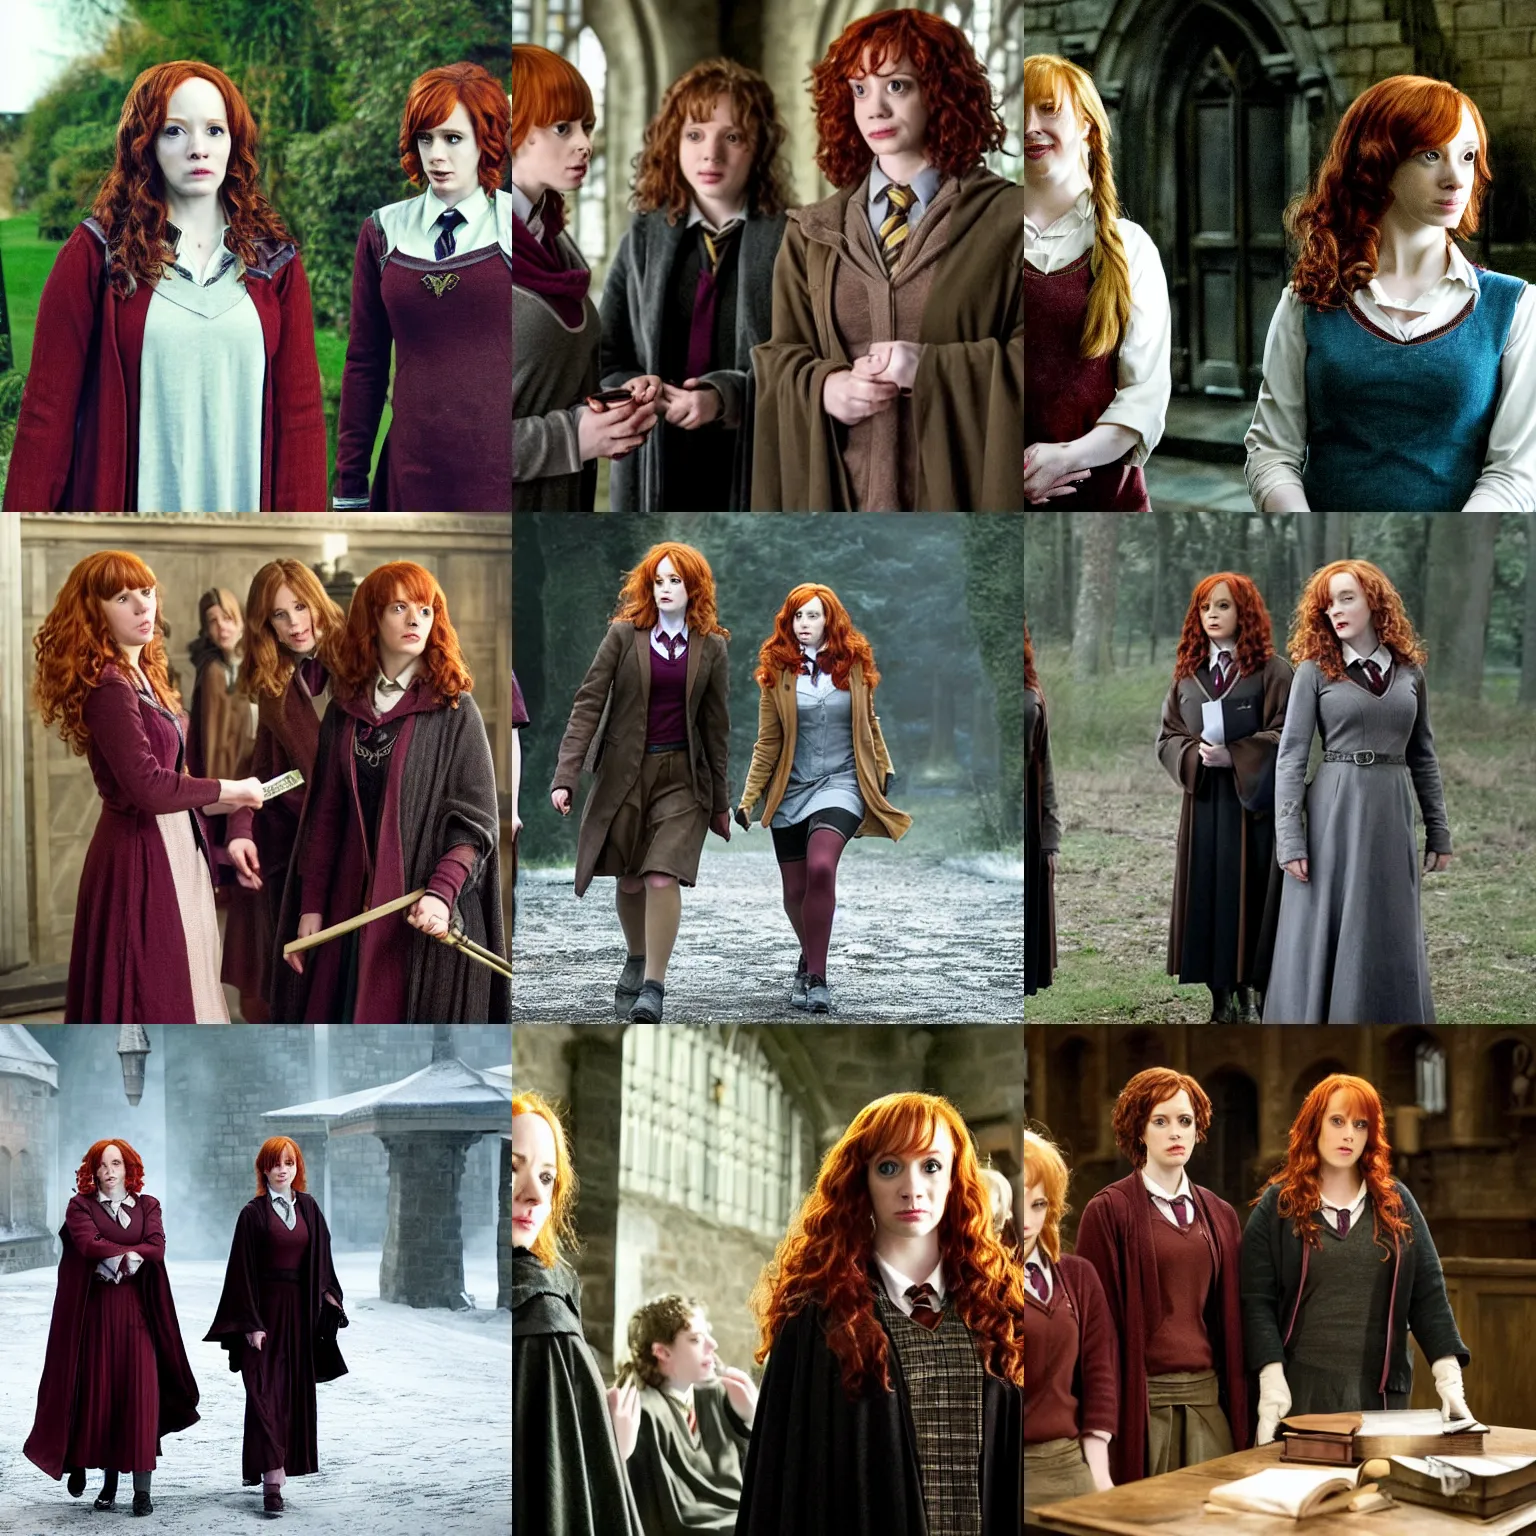 Prompt: female hogwarts student together with ron and hermione played by christina hendricks, movie still harry potter and the deathly hallows by david yates